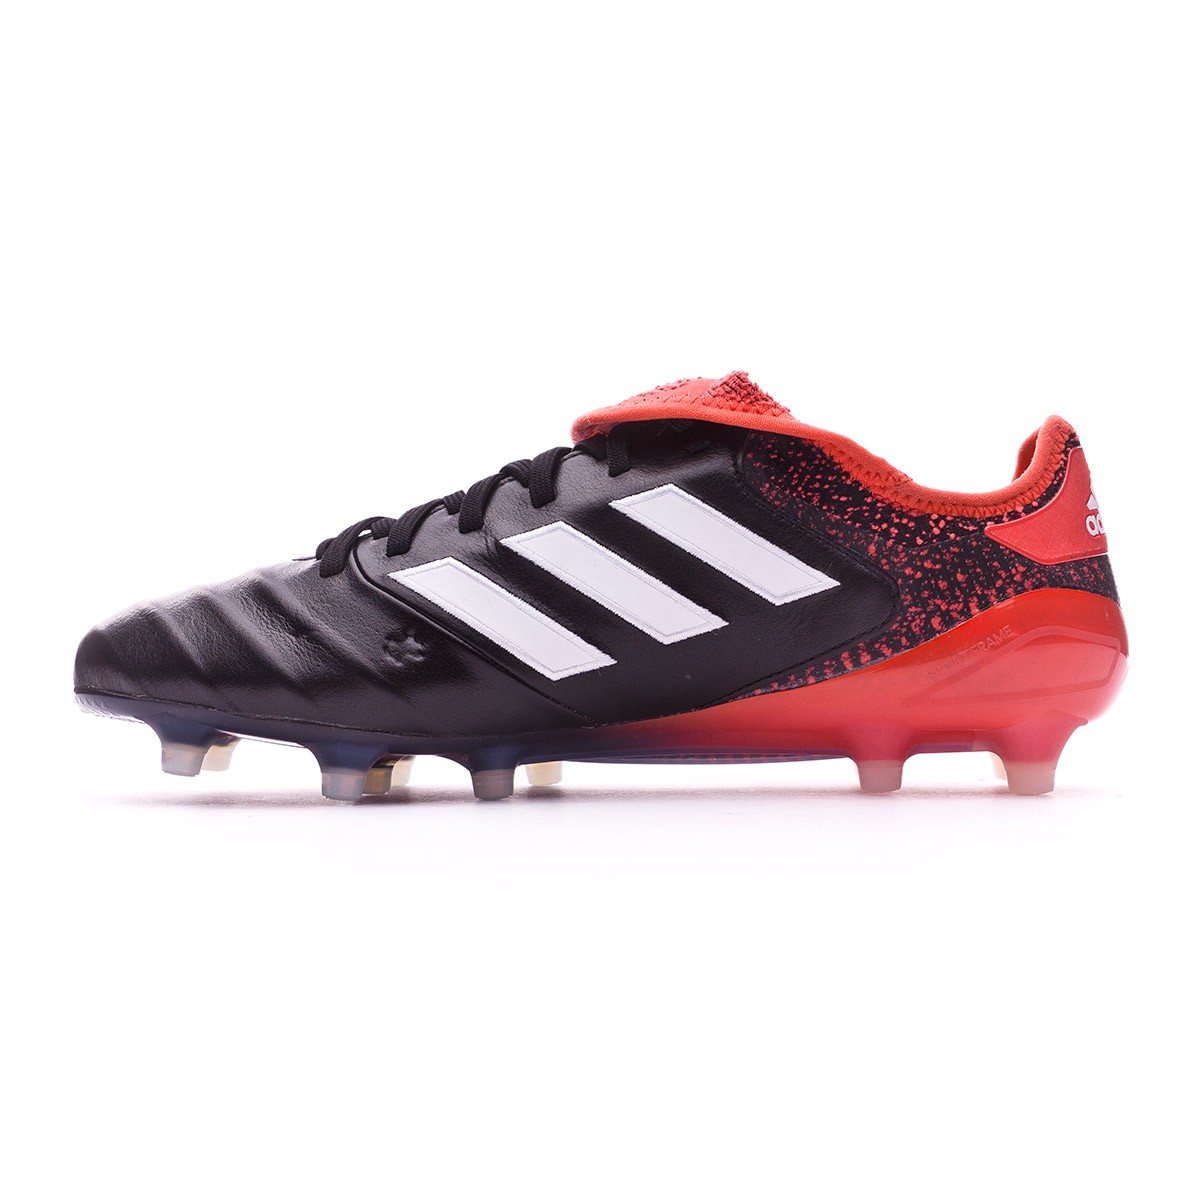 adidas 18.1 copa review